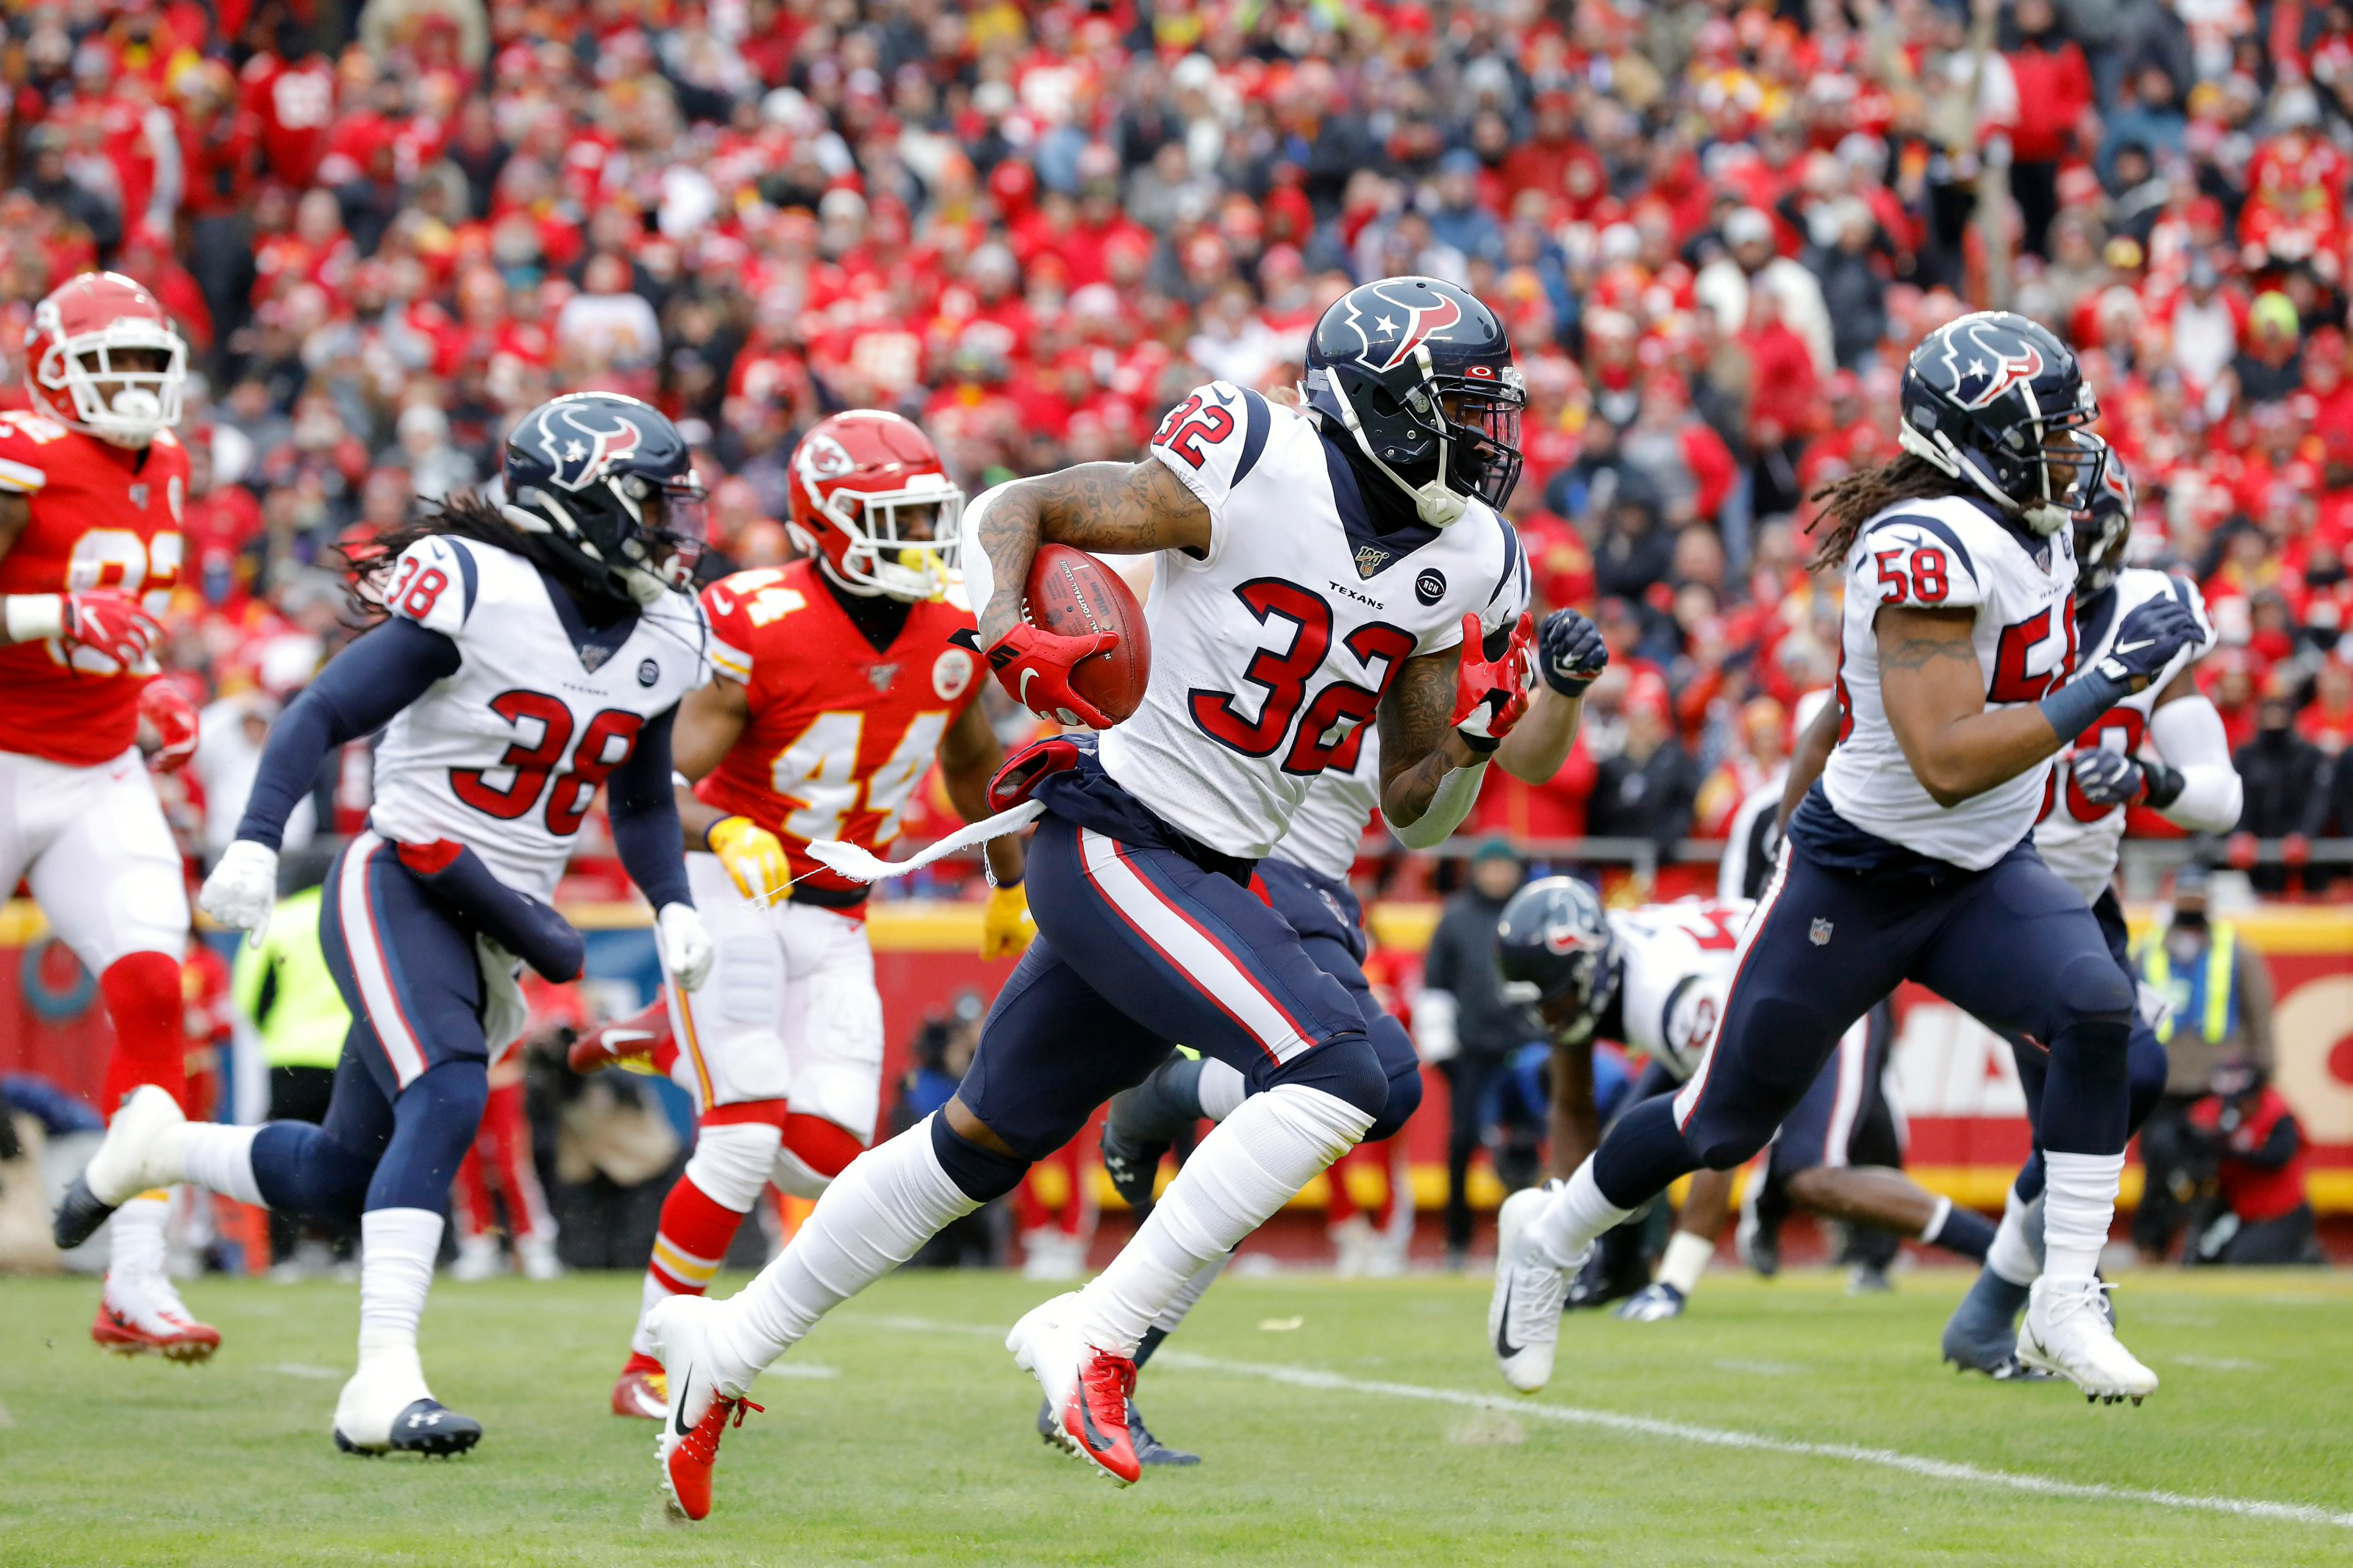 Houston Texans Studs and duds from Week 1 vs. Chiefs